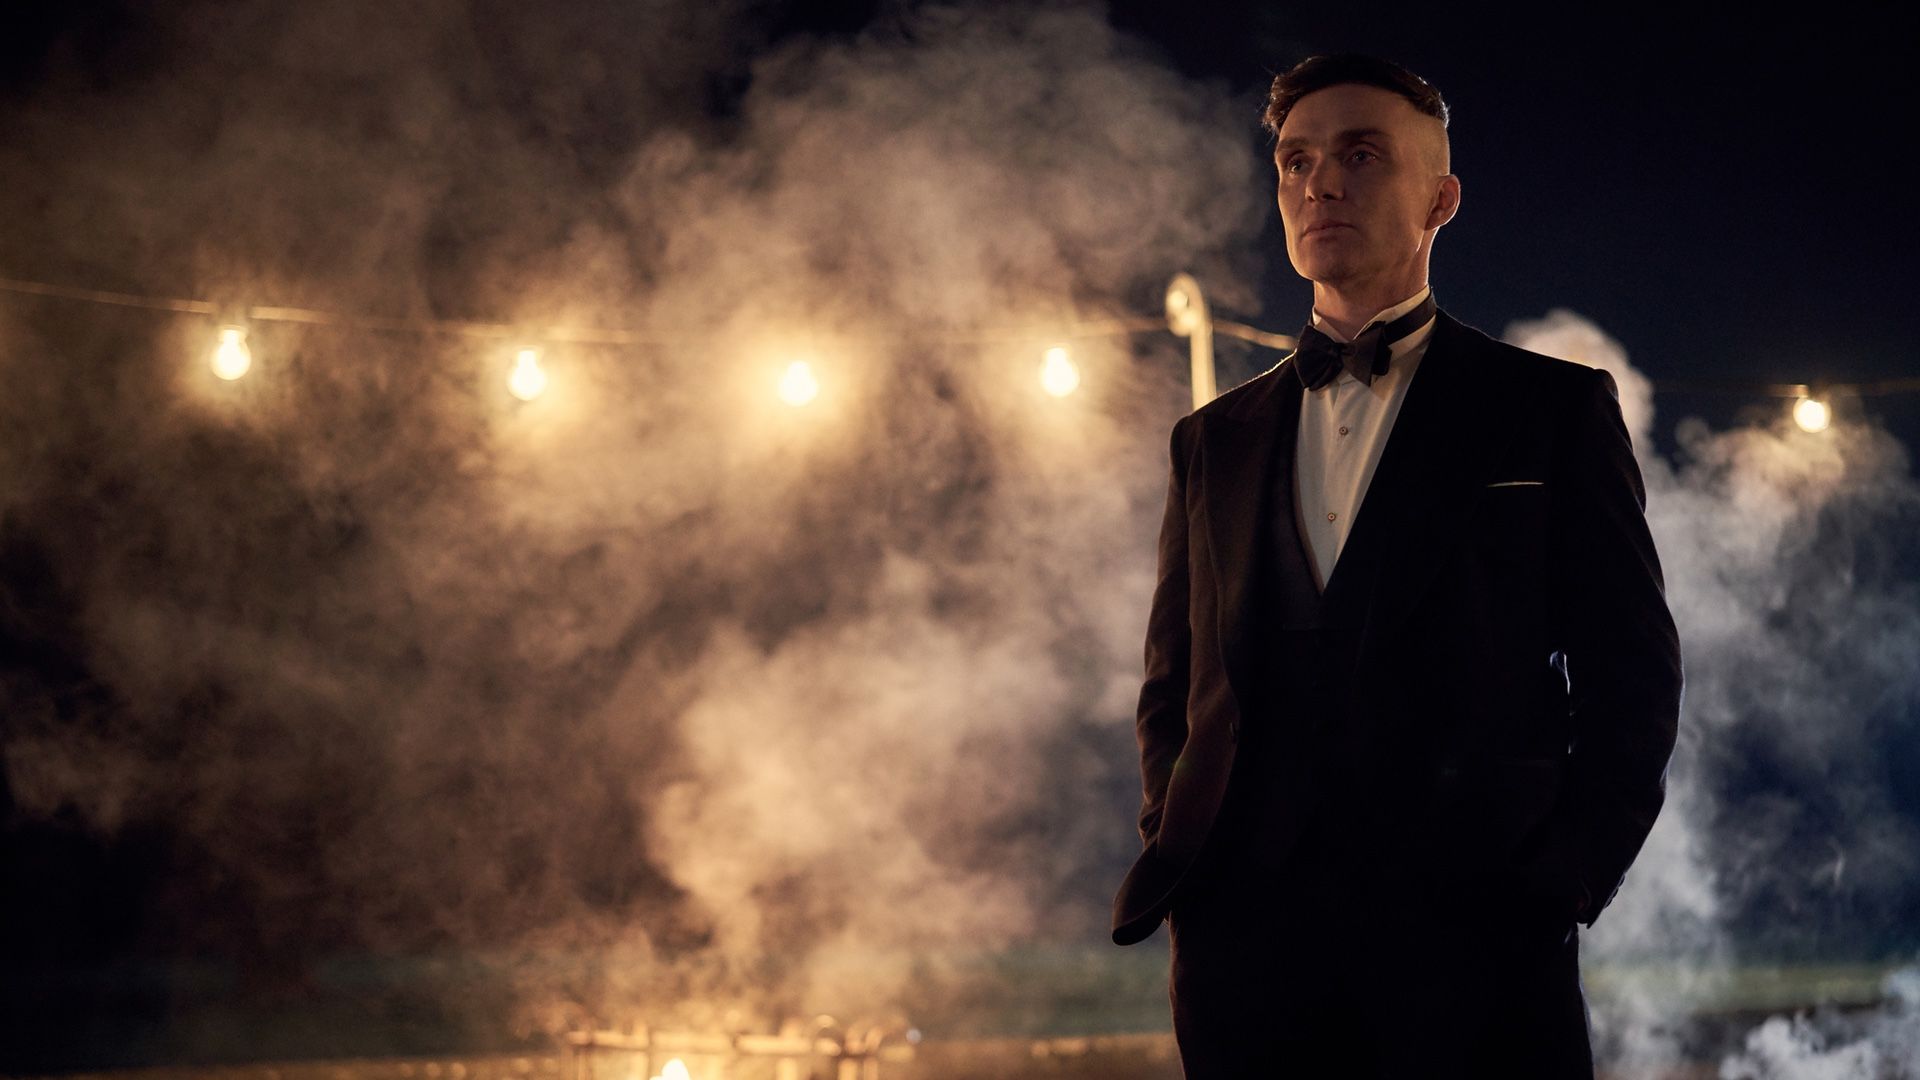 Peaky Blinders Hintergrundbild 1920x1080. Free download The Long Awaited Fifth Season of Netflixs PEAKY BLINDERS Gets a [1920x1080] for your Desktop, Mobile & Tablet. Explore I Am Peaky Blinder Wallpaper. I Am Awesome